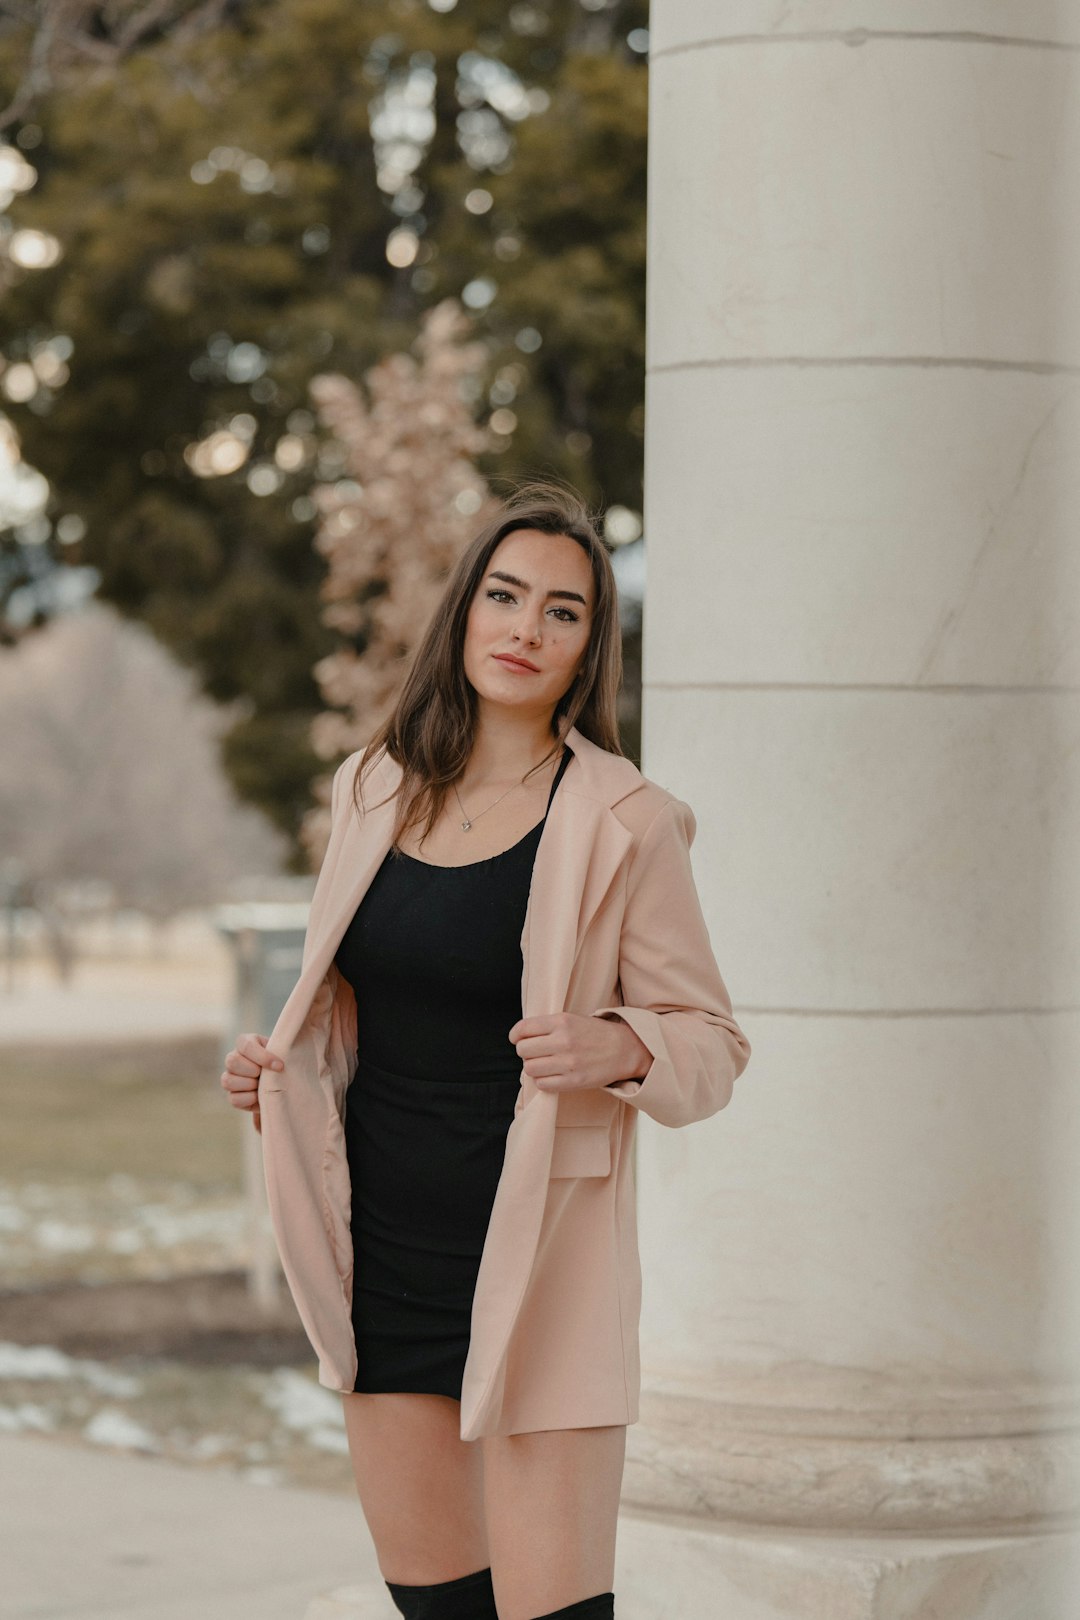 woman in pink blazer standing near white wall during daytime